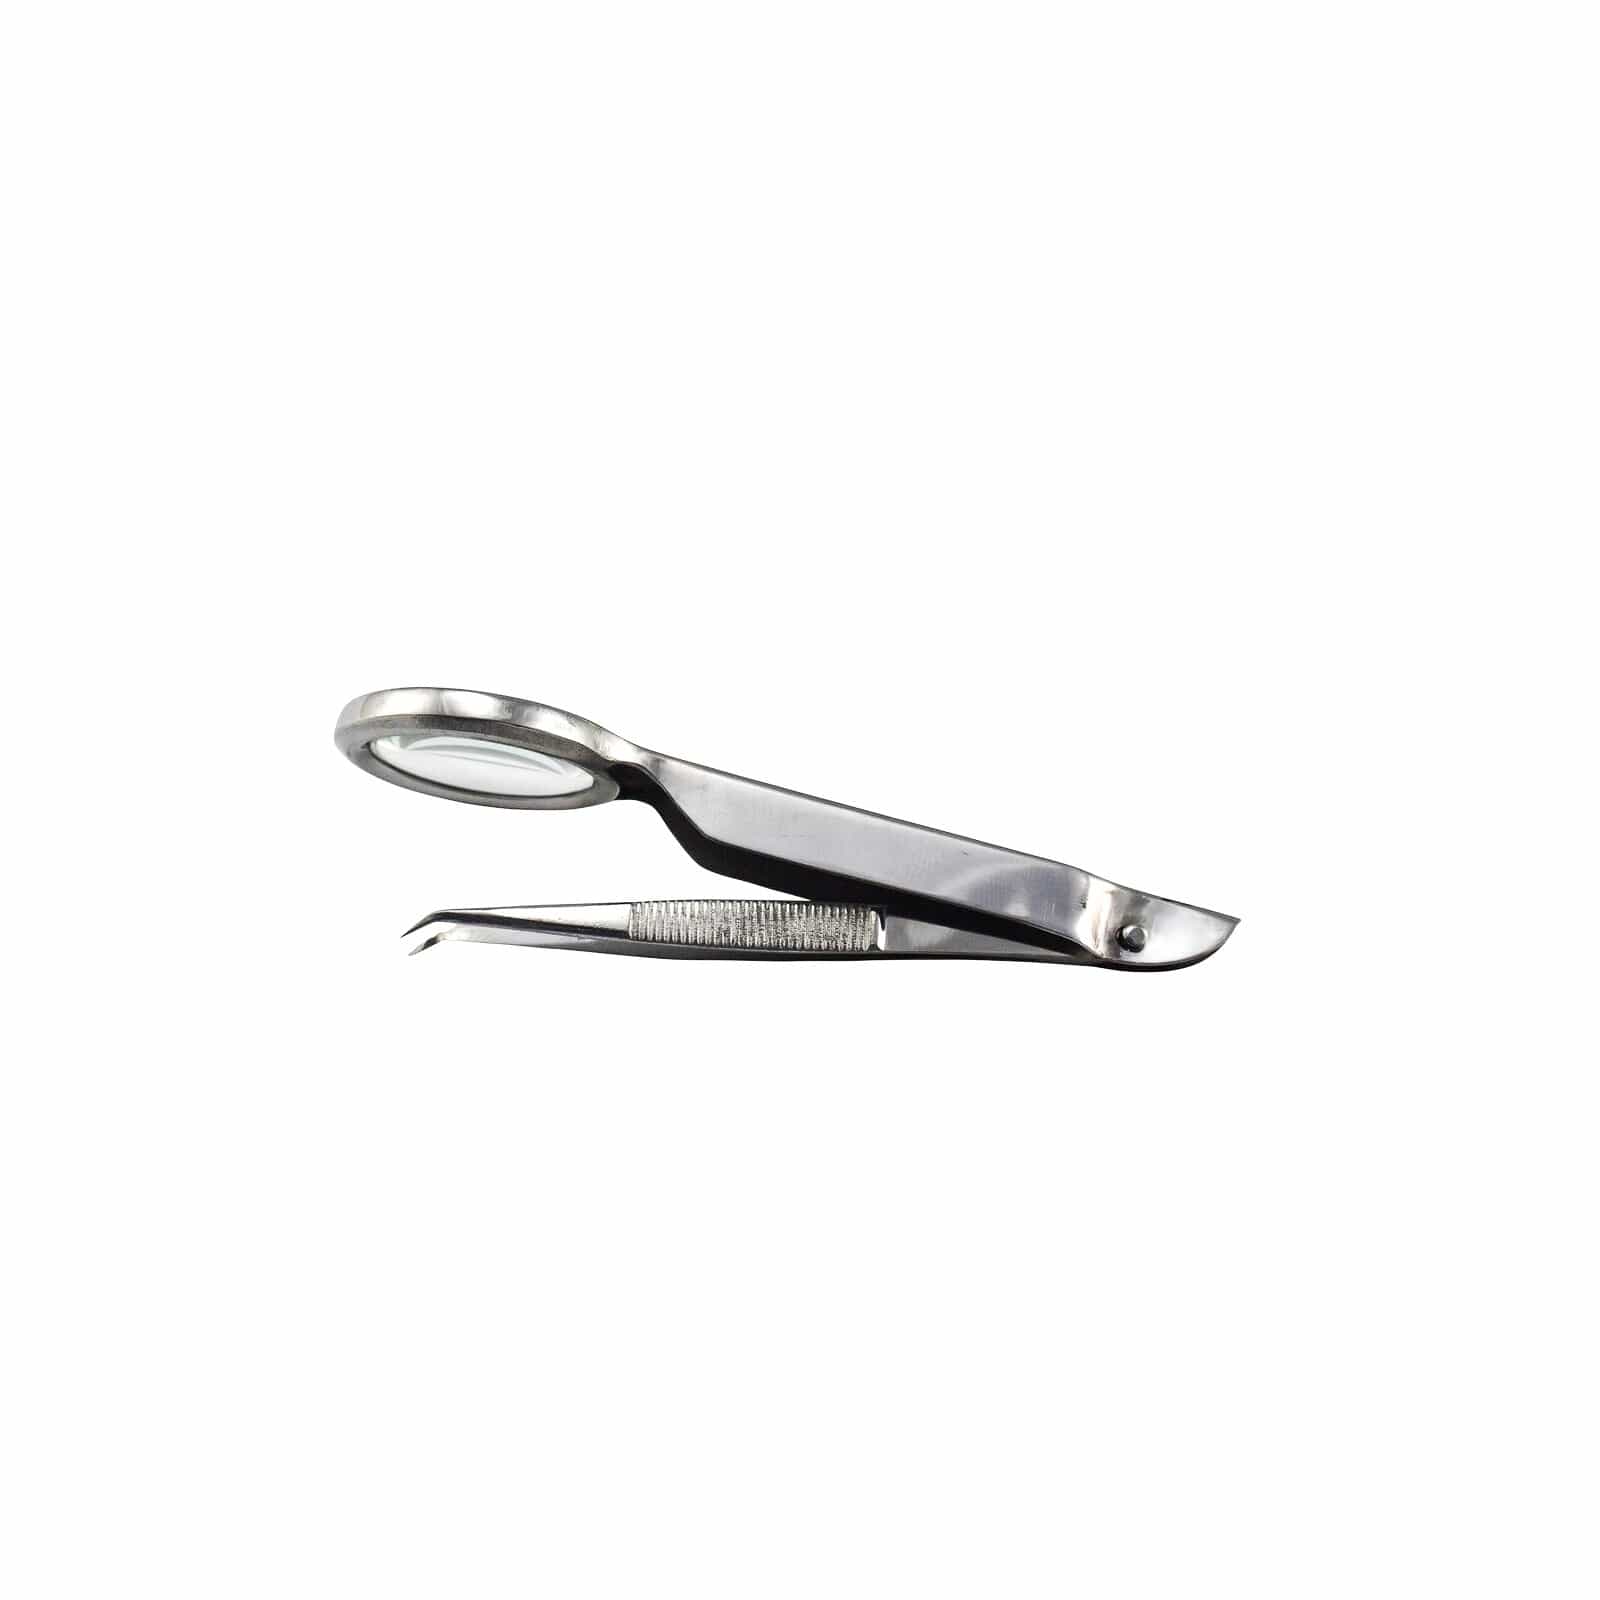 Sayco Surgical Instruments 10cm / Curved / 1x2 Teeth Sayco Forceps With Magnifier